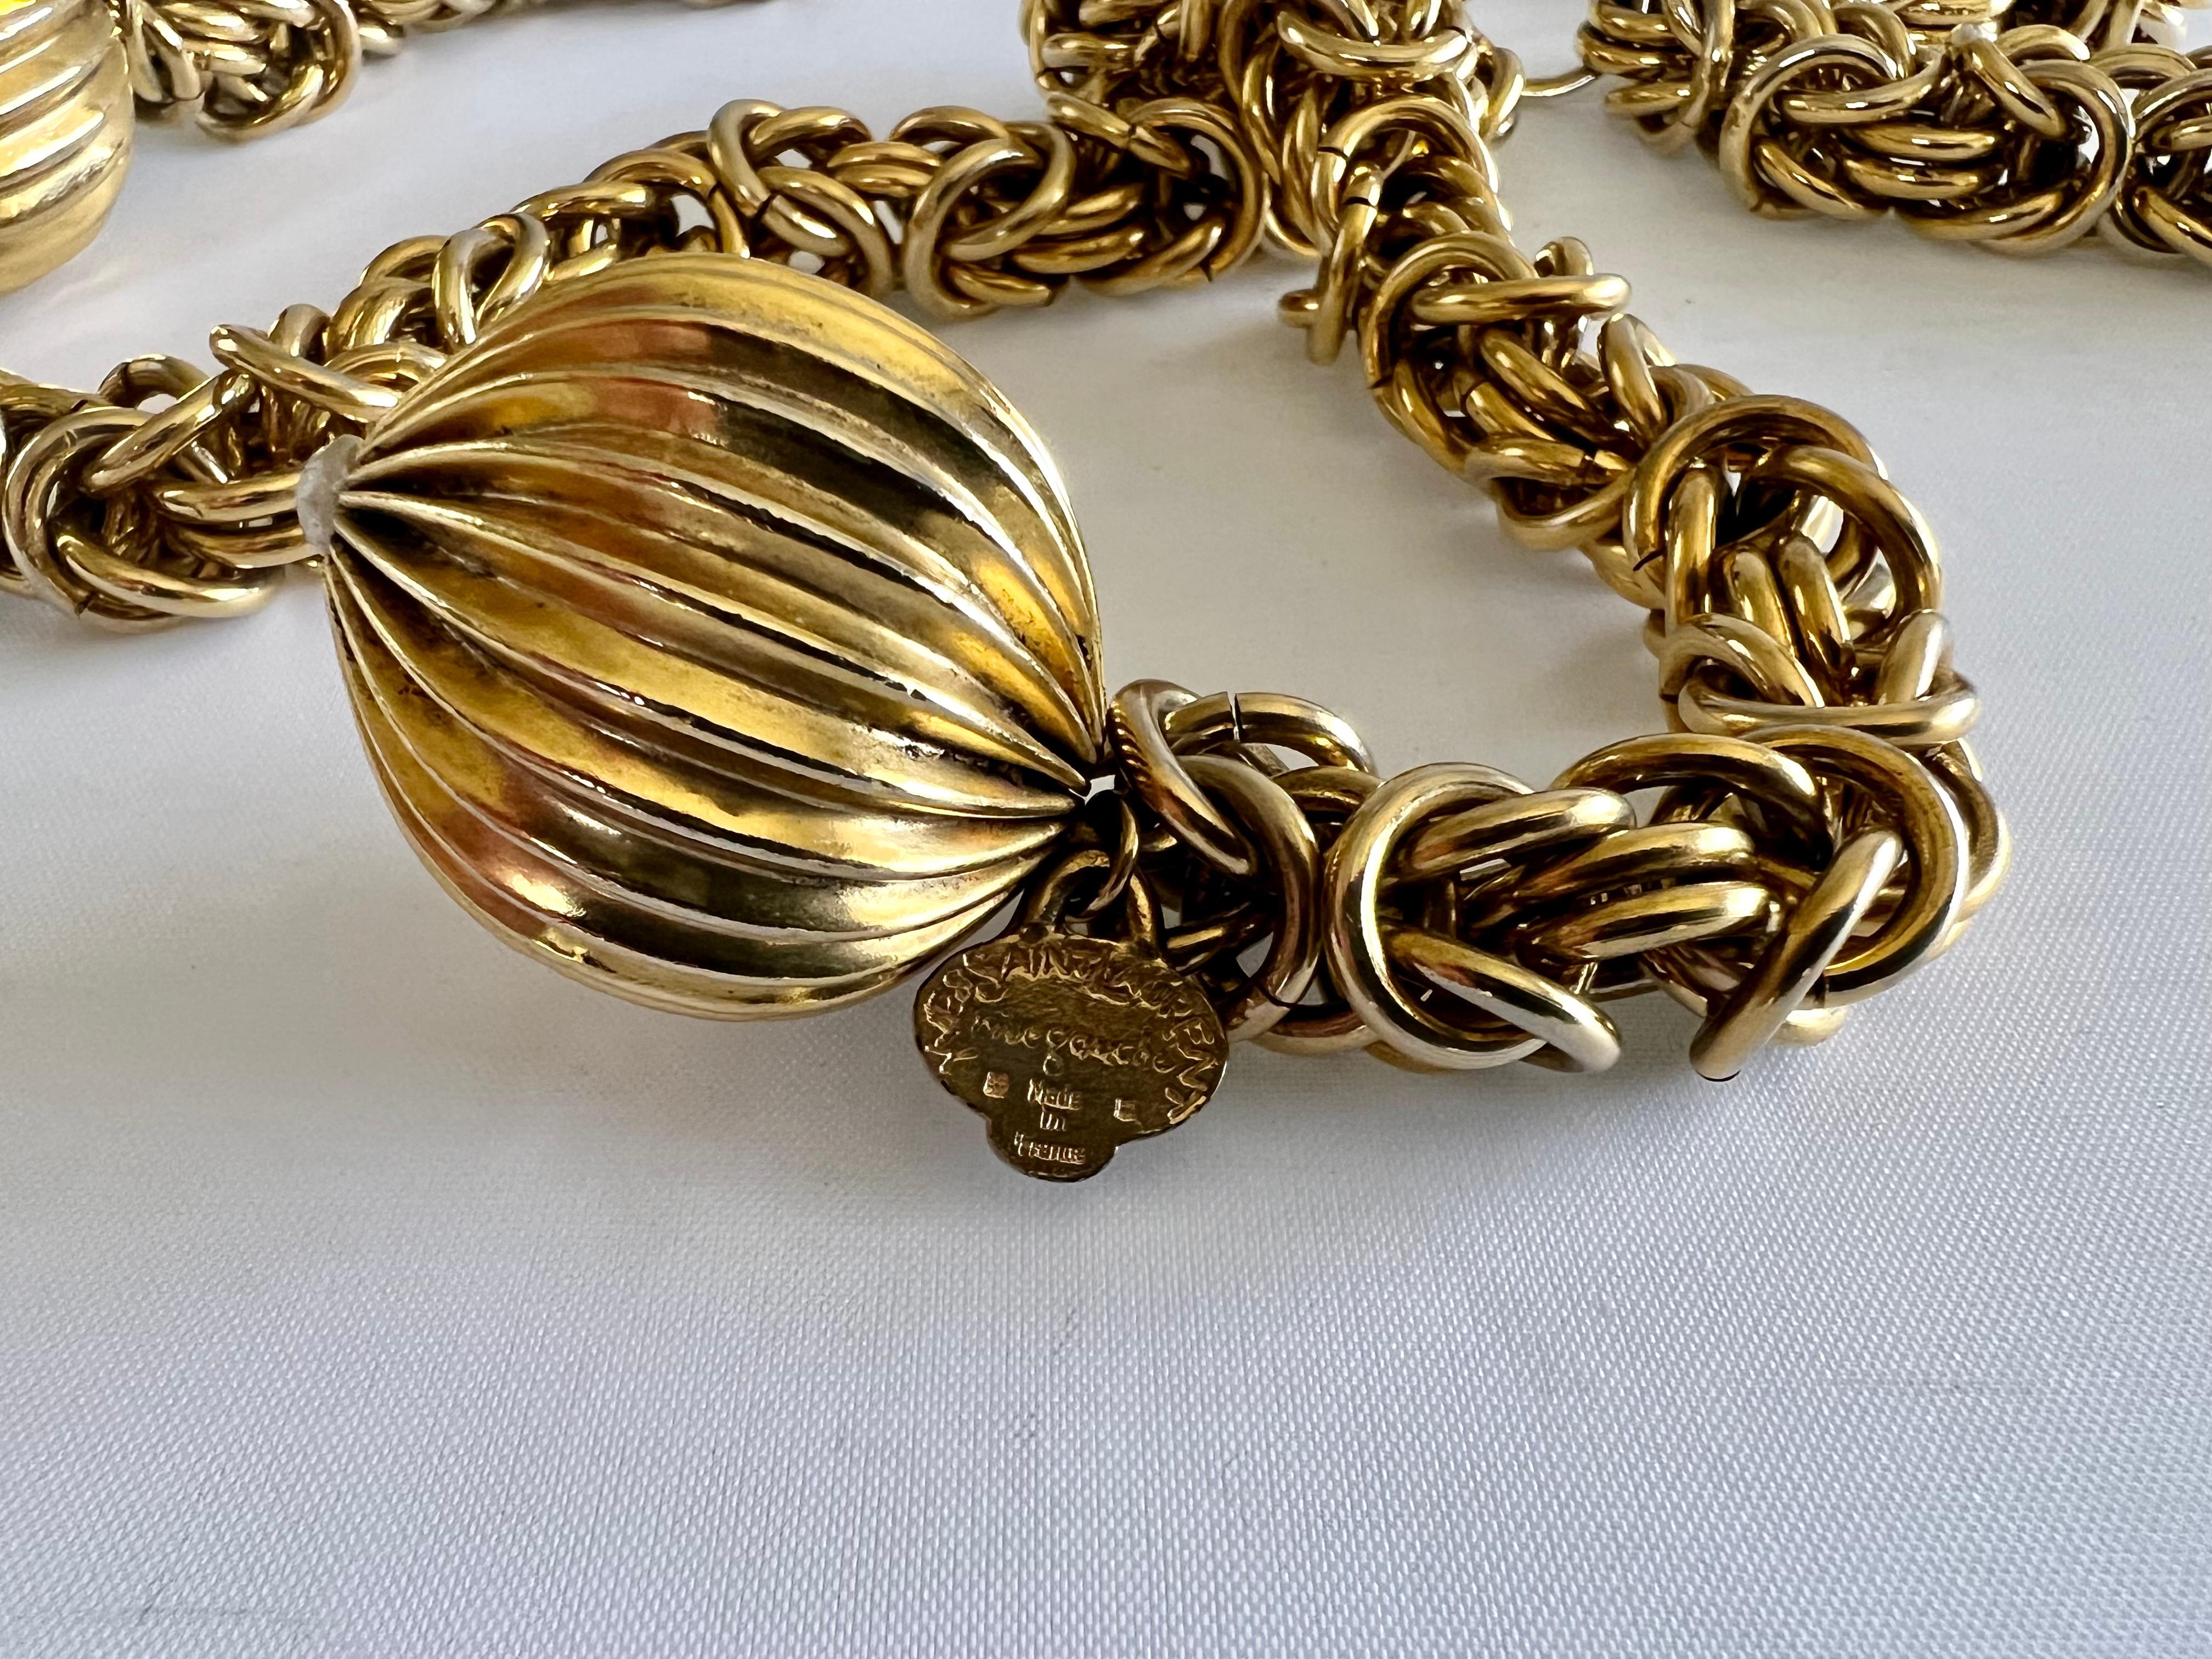 Vintage Yves Saint Laurent Gold Ball Statement Necklace/Belt In Excellent Condition For Sale In Palm Springs, CA